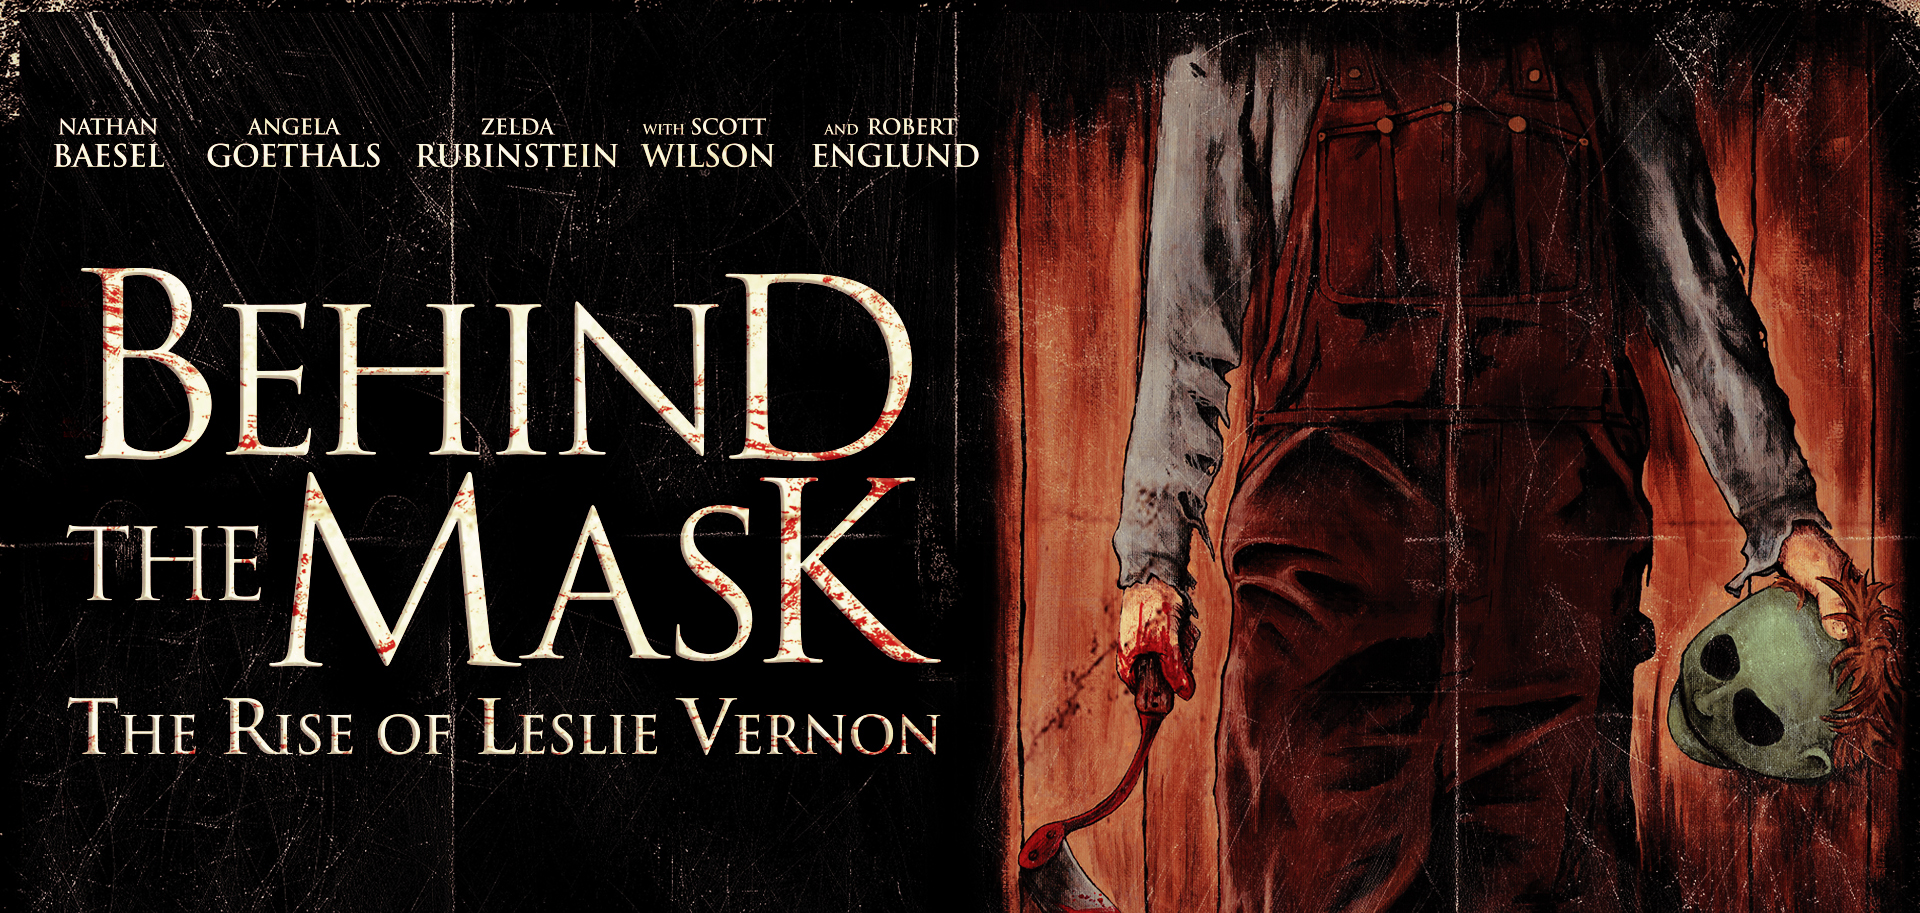 38-facts-about-the-movie-behind-the-mask-the-rise-of-leslie-vernon